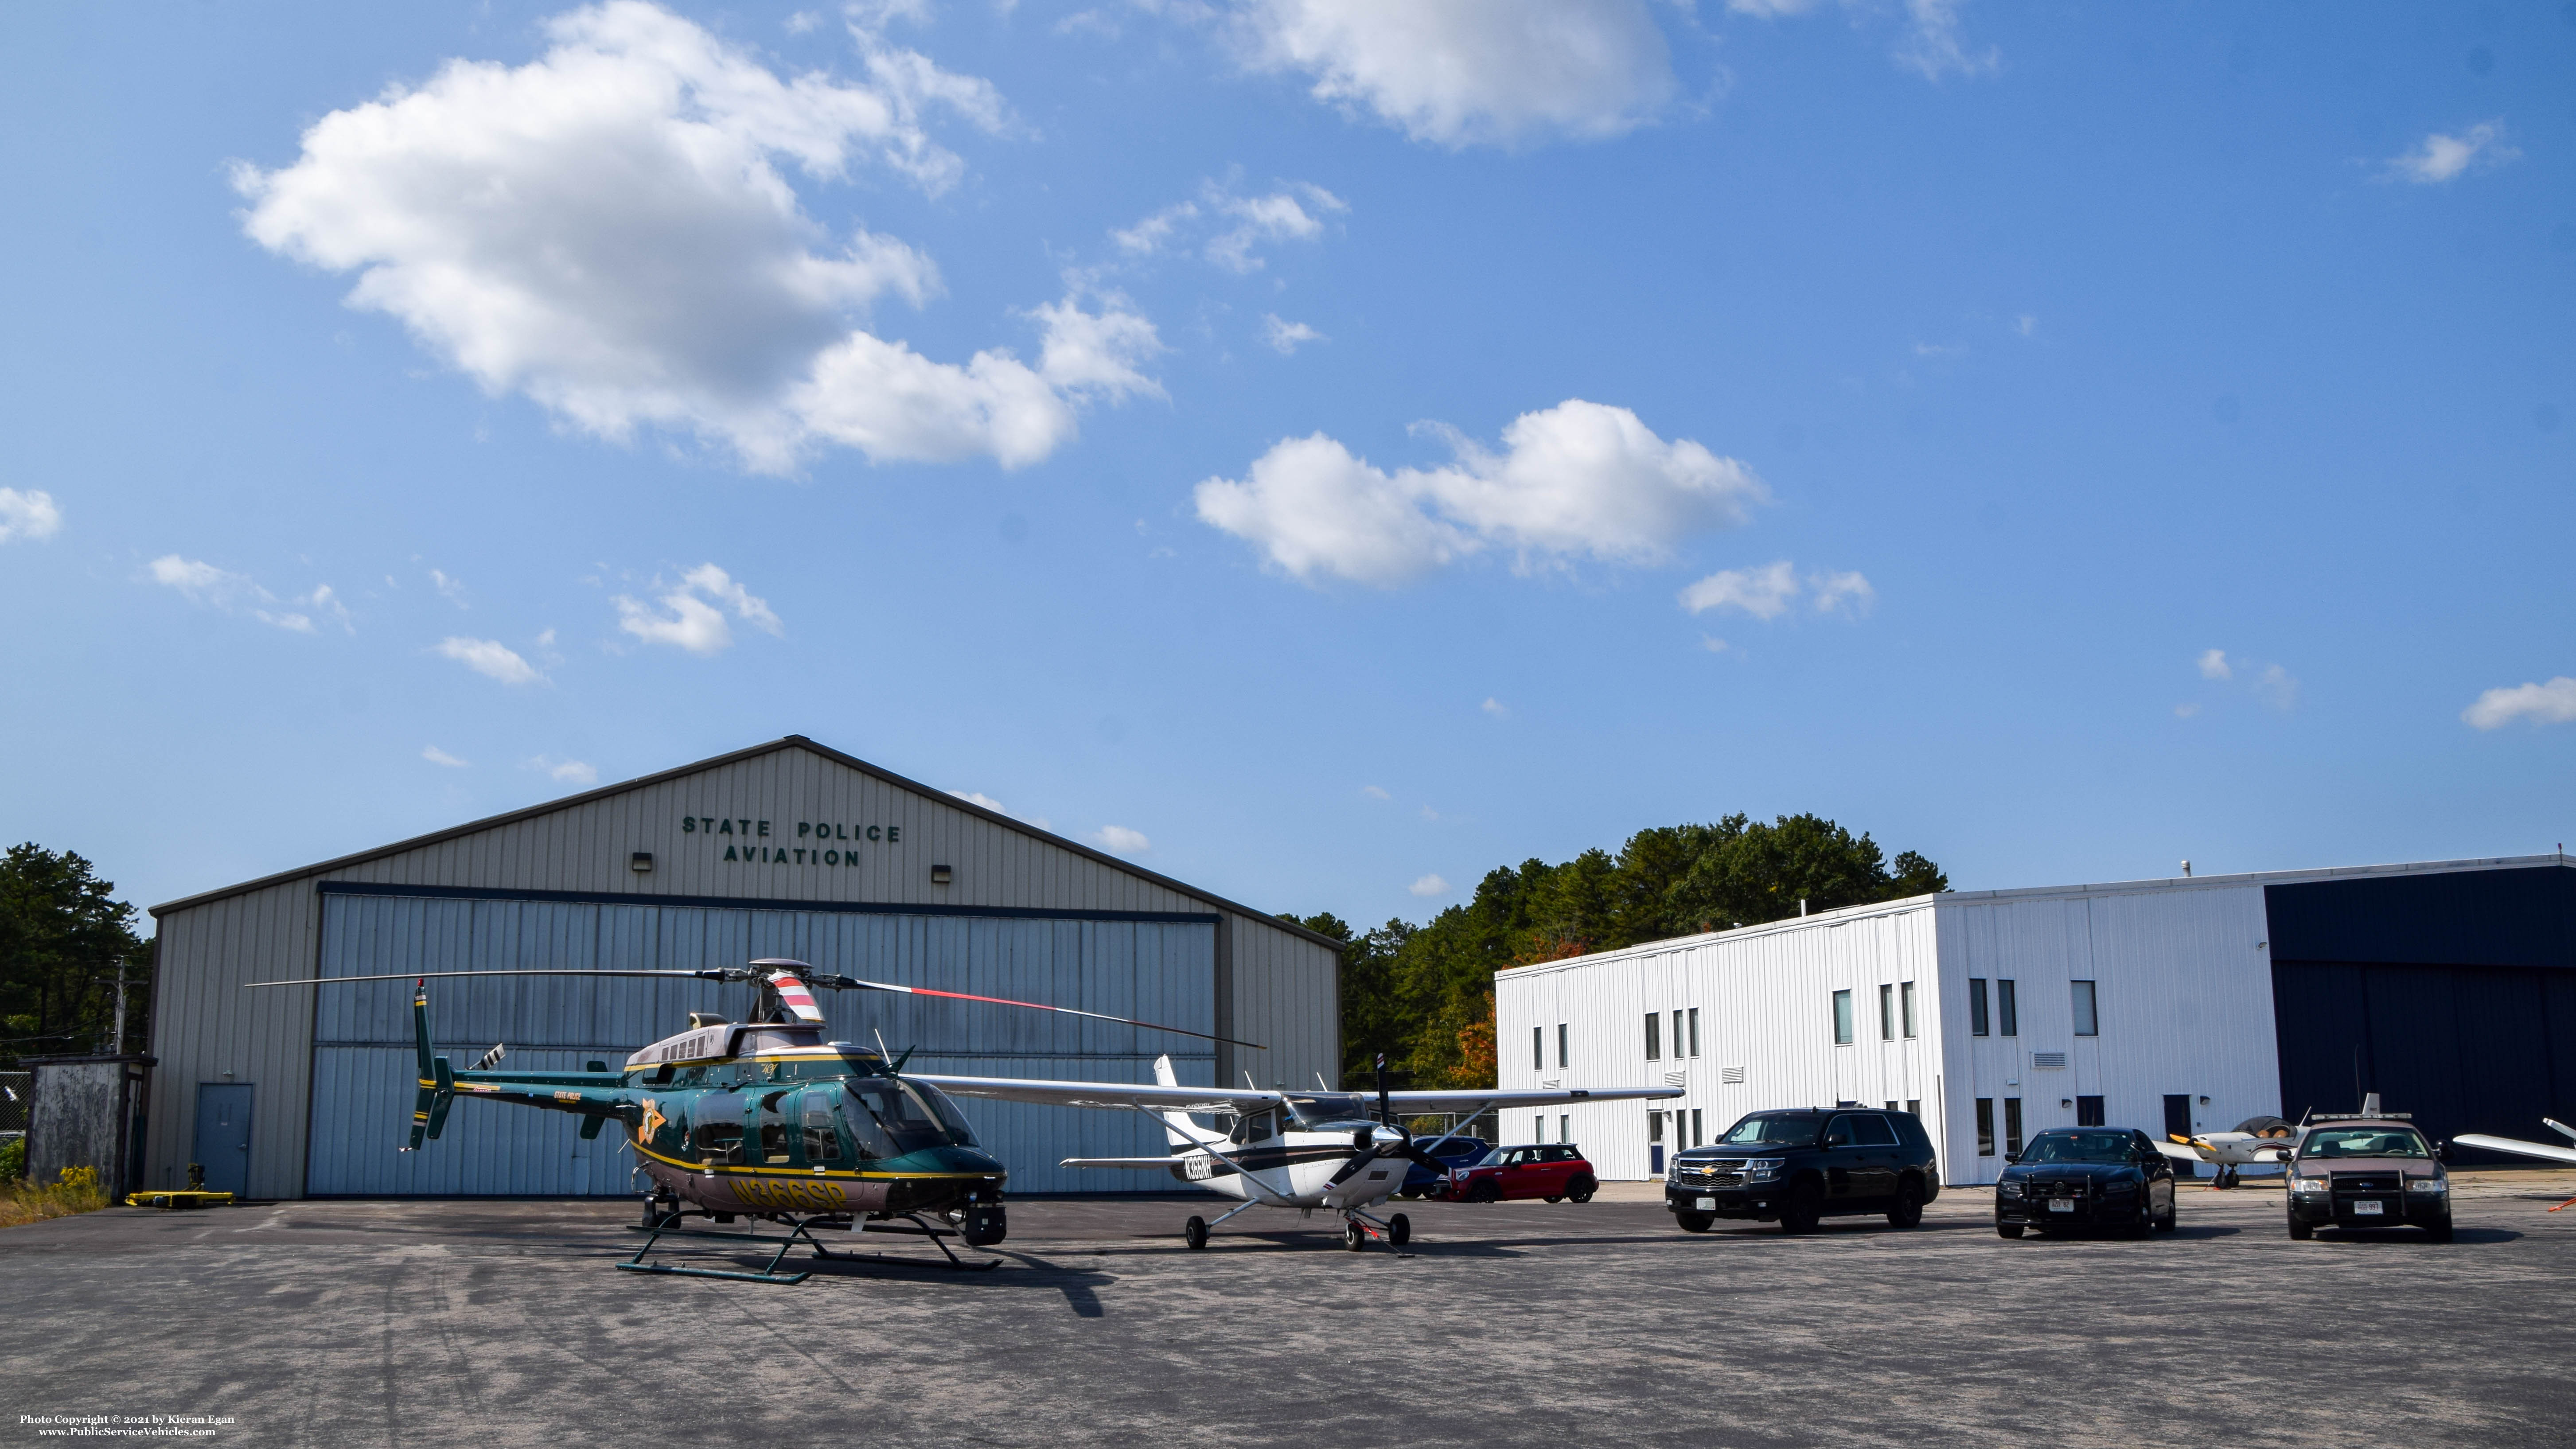 A photo  of New Hampshire State Police
            N366SP, a 2002 Bell 407 Helicopter             taken by Kieran Egan